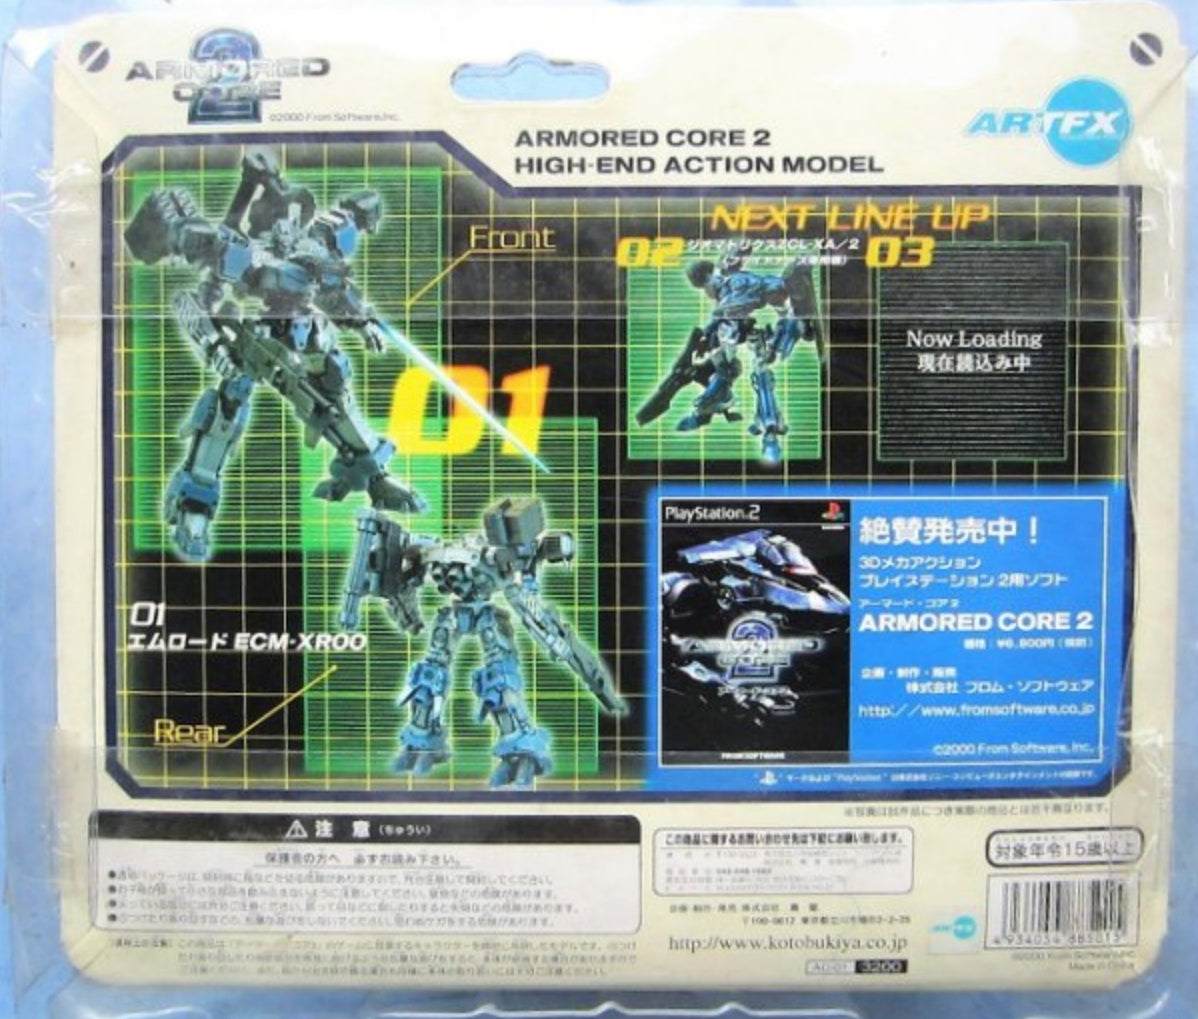 New Armored Core 2 Another Age (High-End Action Figure 01